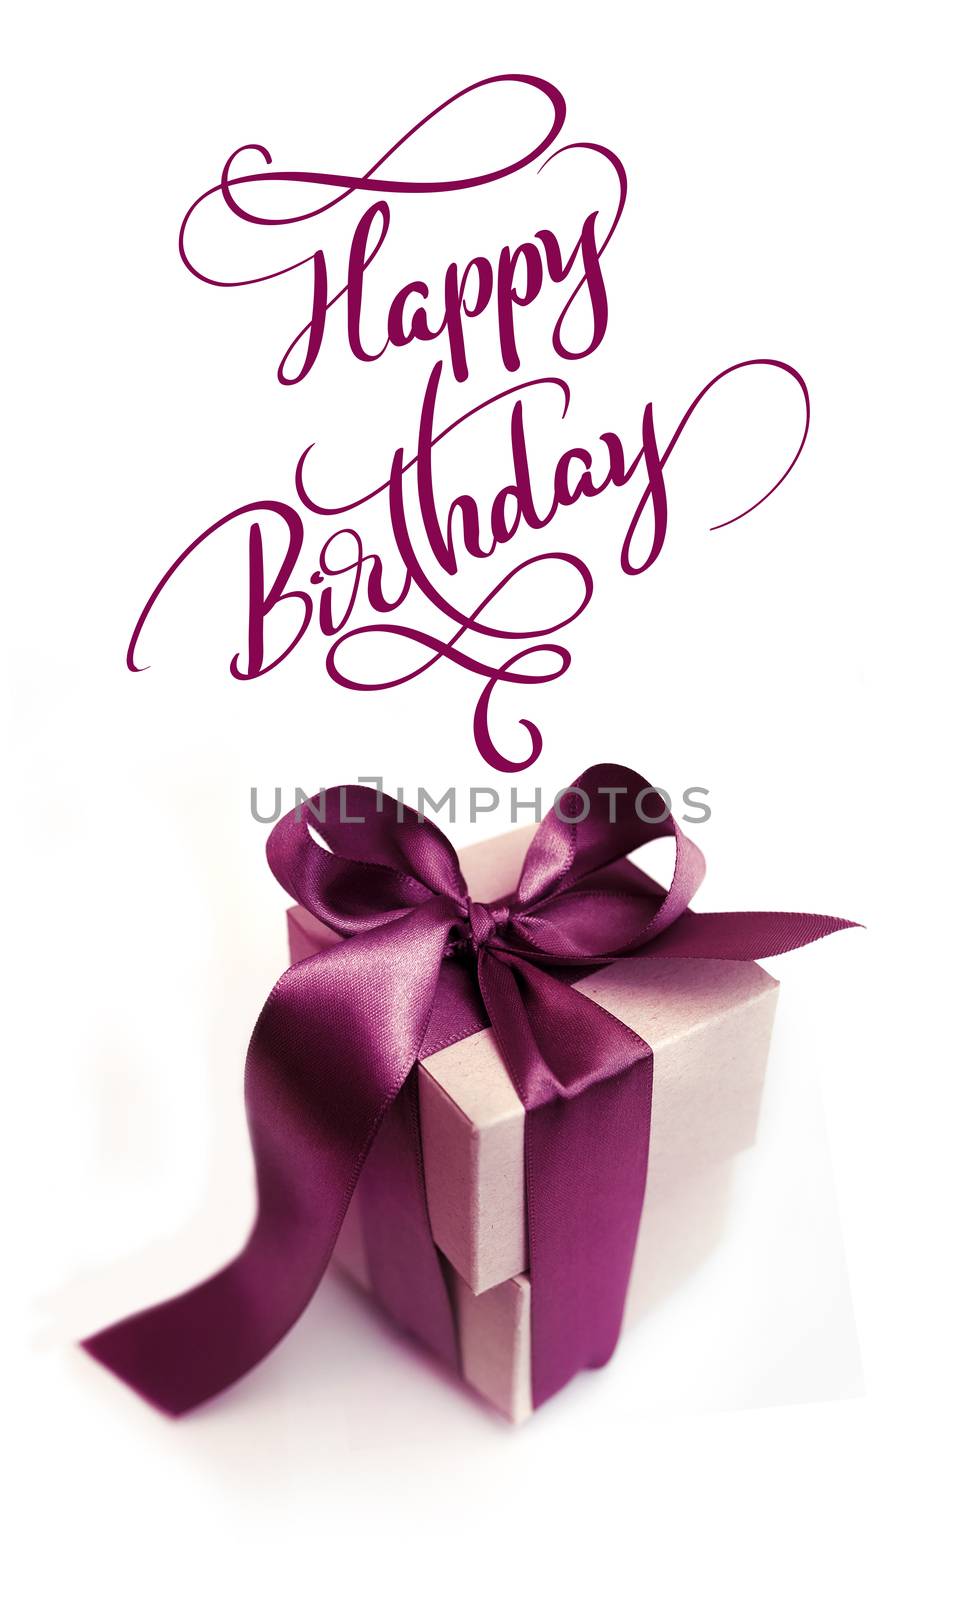 Gift boxes with brown bow on a white background and text Happy Birthday. Calligraphy lettering by timonko